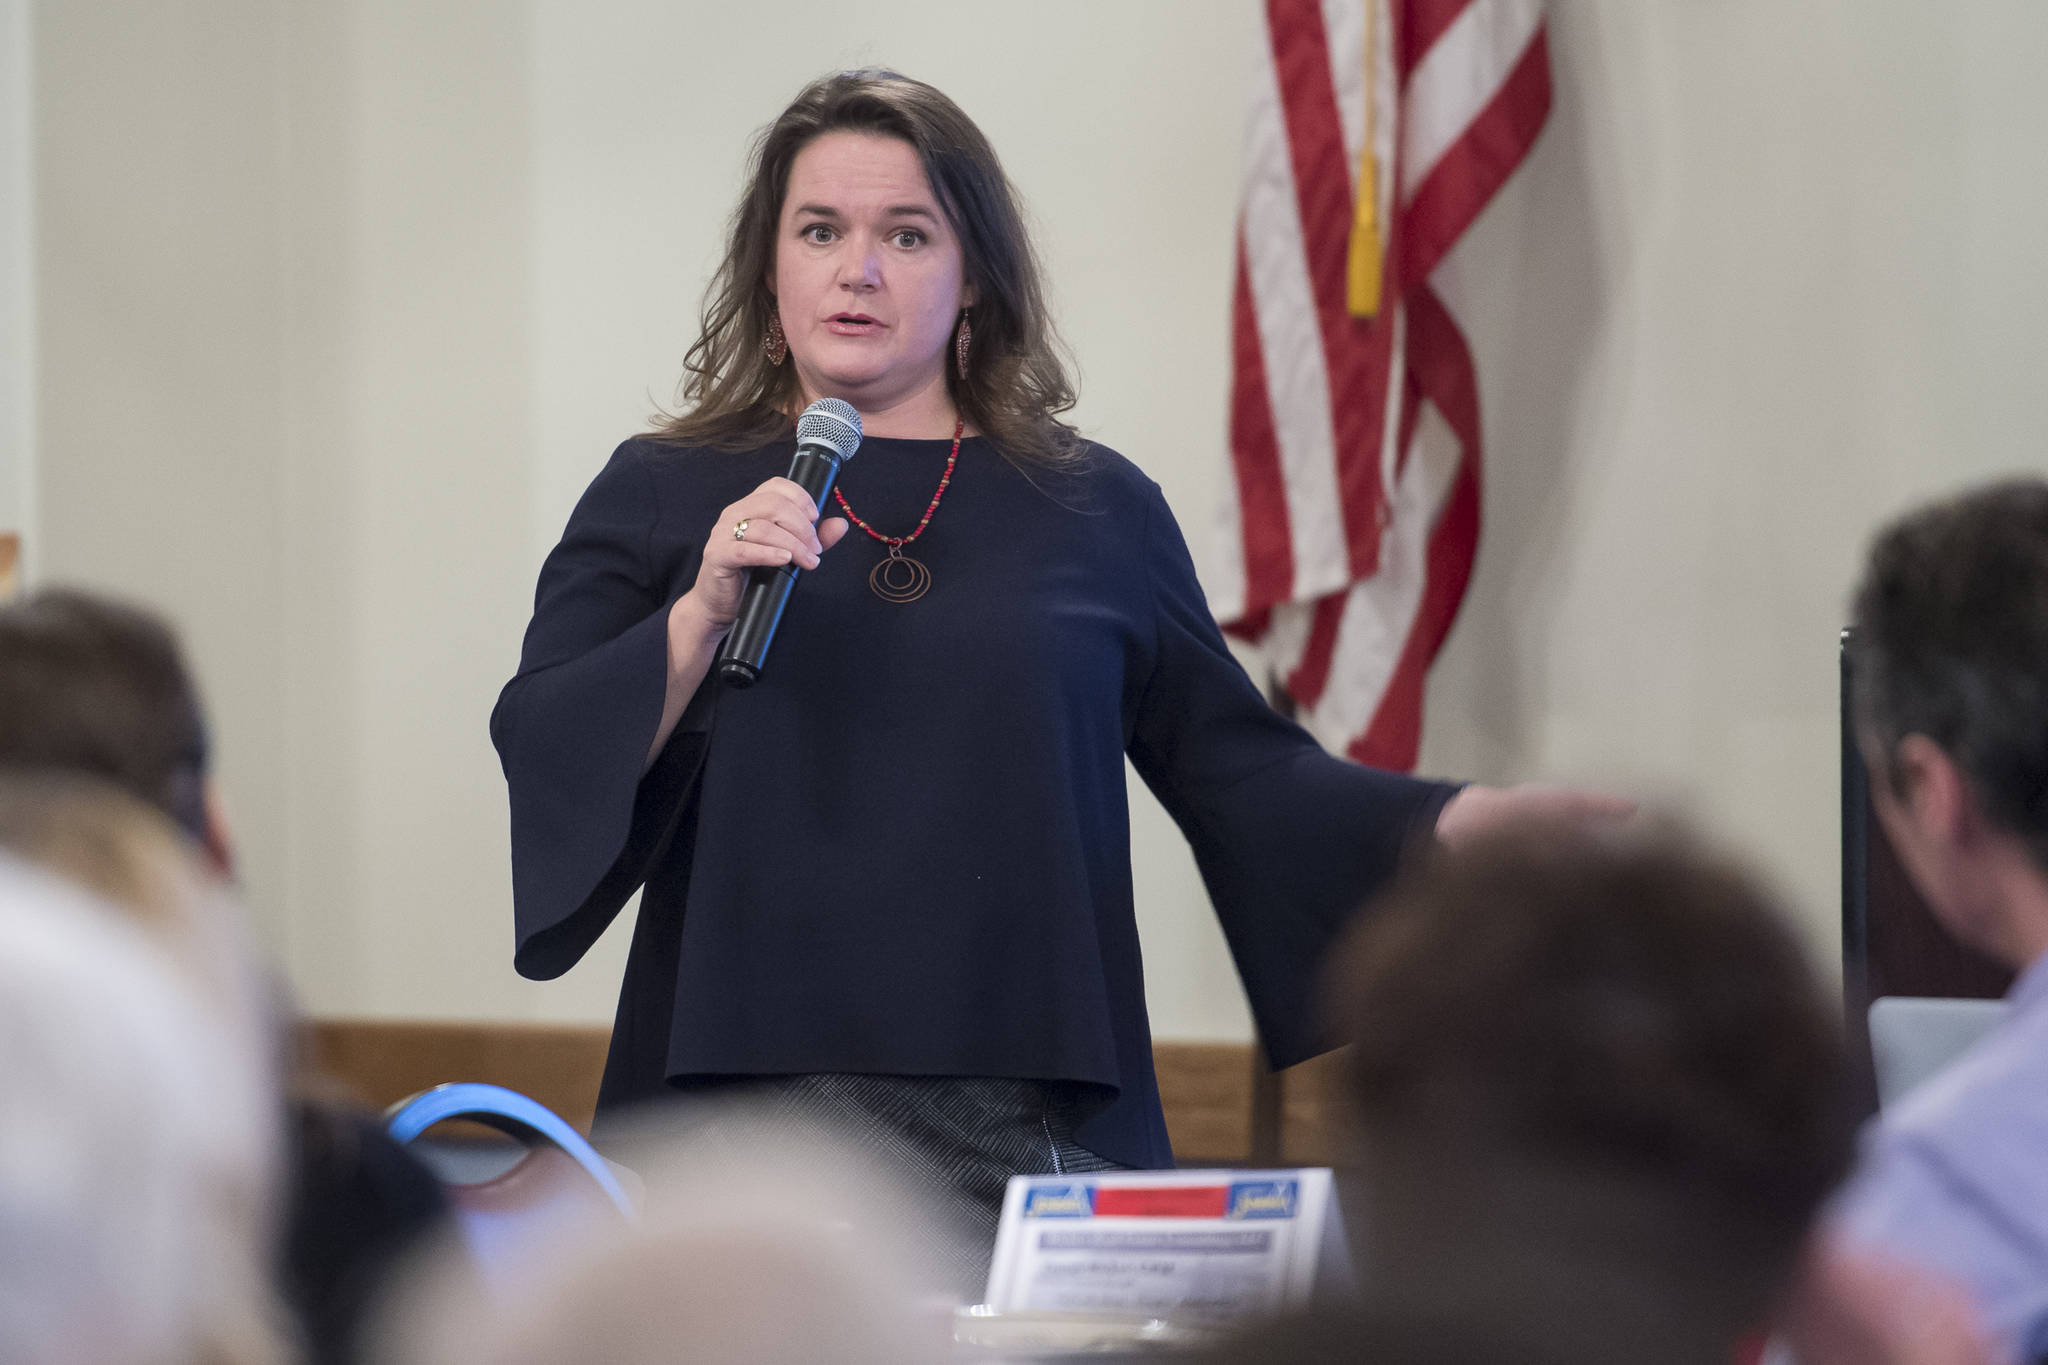 Meilani Schijvens, Director of Rain Coast Data, speaks to the Juneau Chamber of Commerce about Juneau ecomony at the Moose Lodge on Thursday, Nov. 1, 2018. (Michael Penn | Juneau Empire)